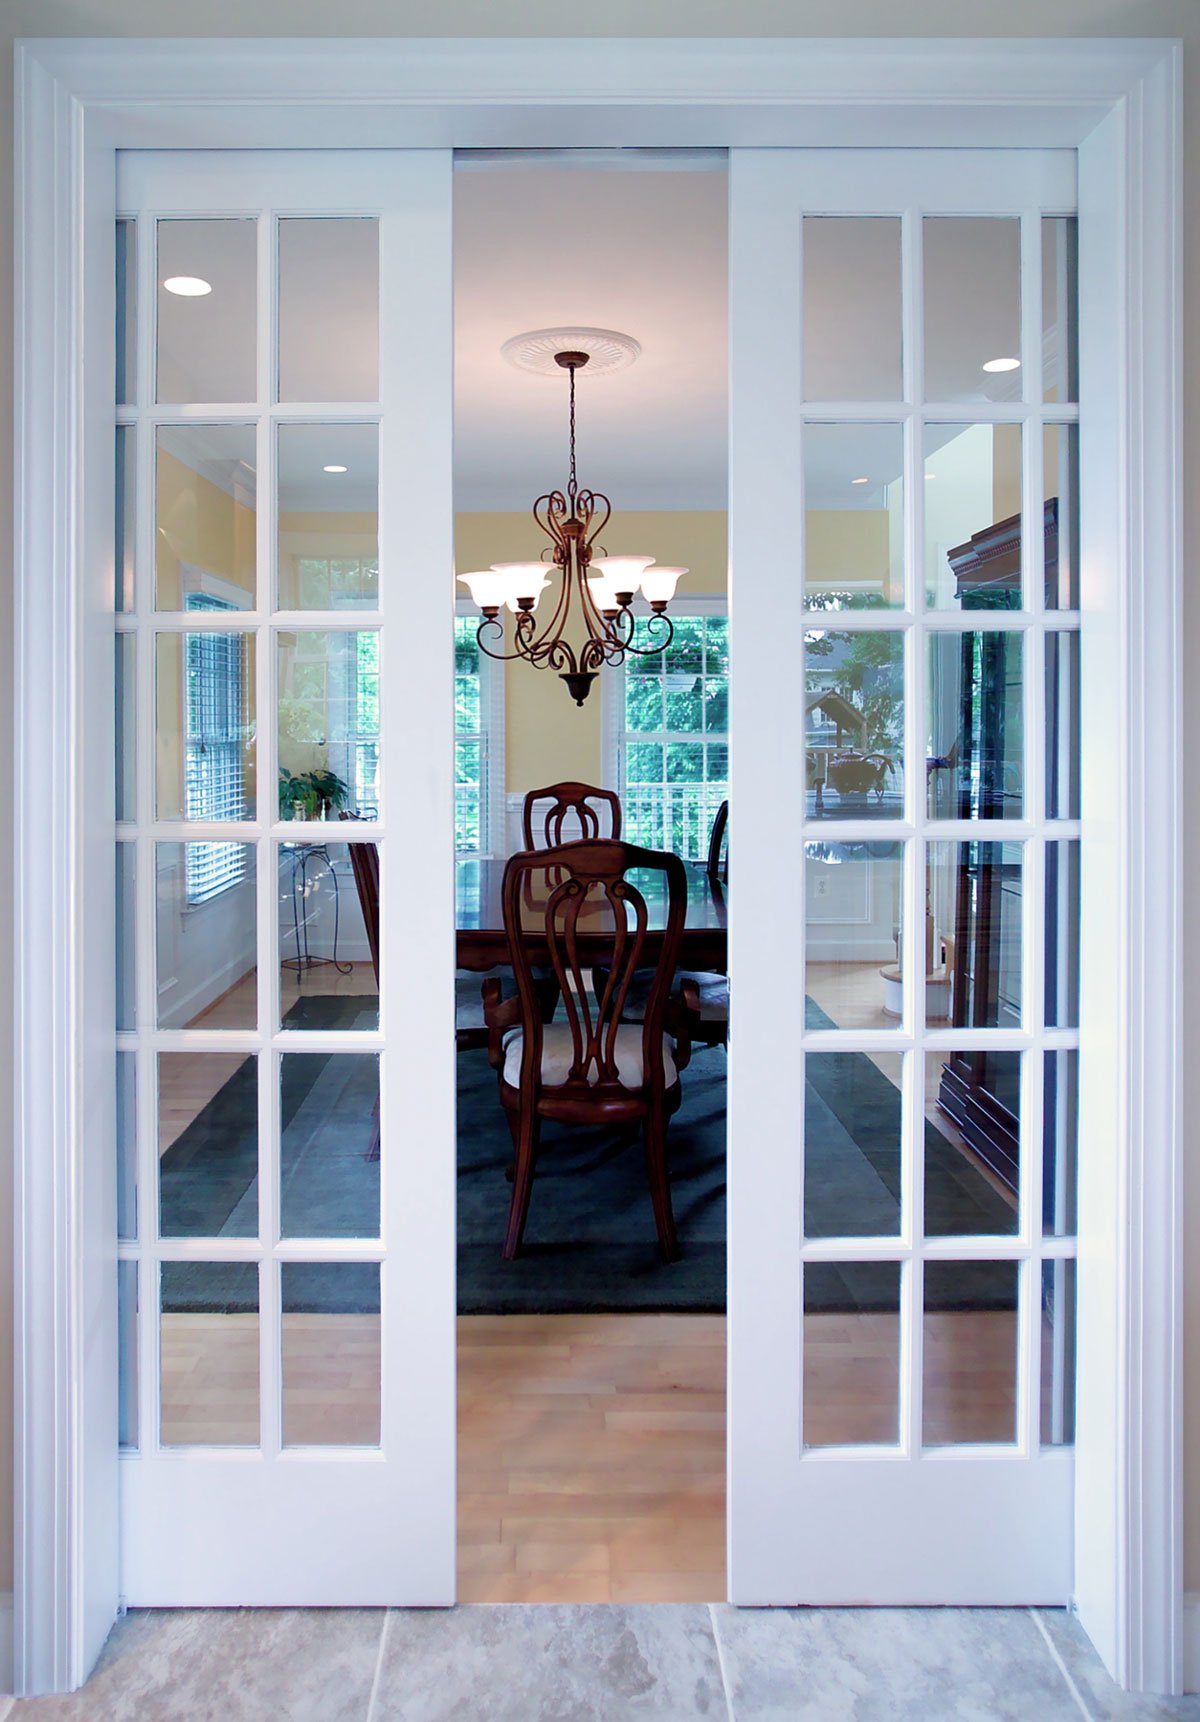 Sliding white wooden double doors lead into a family dining room with seating for four